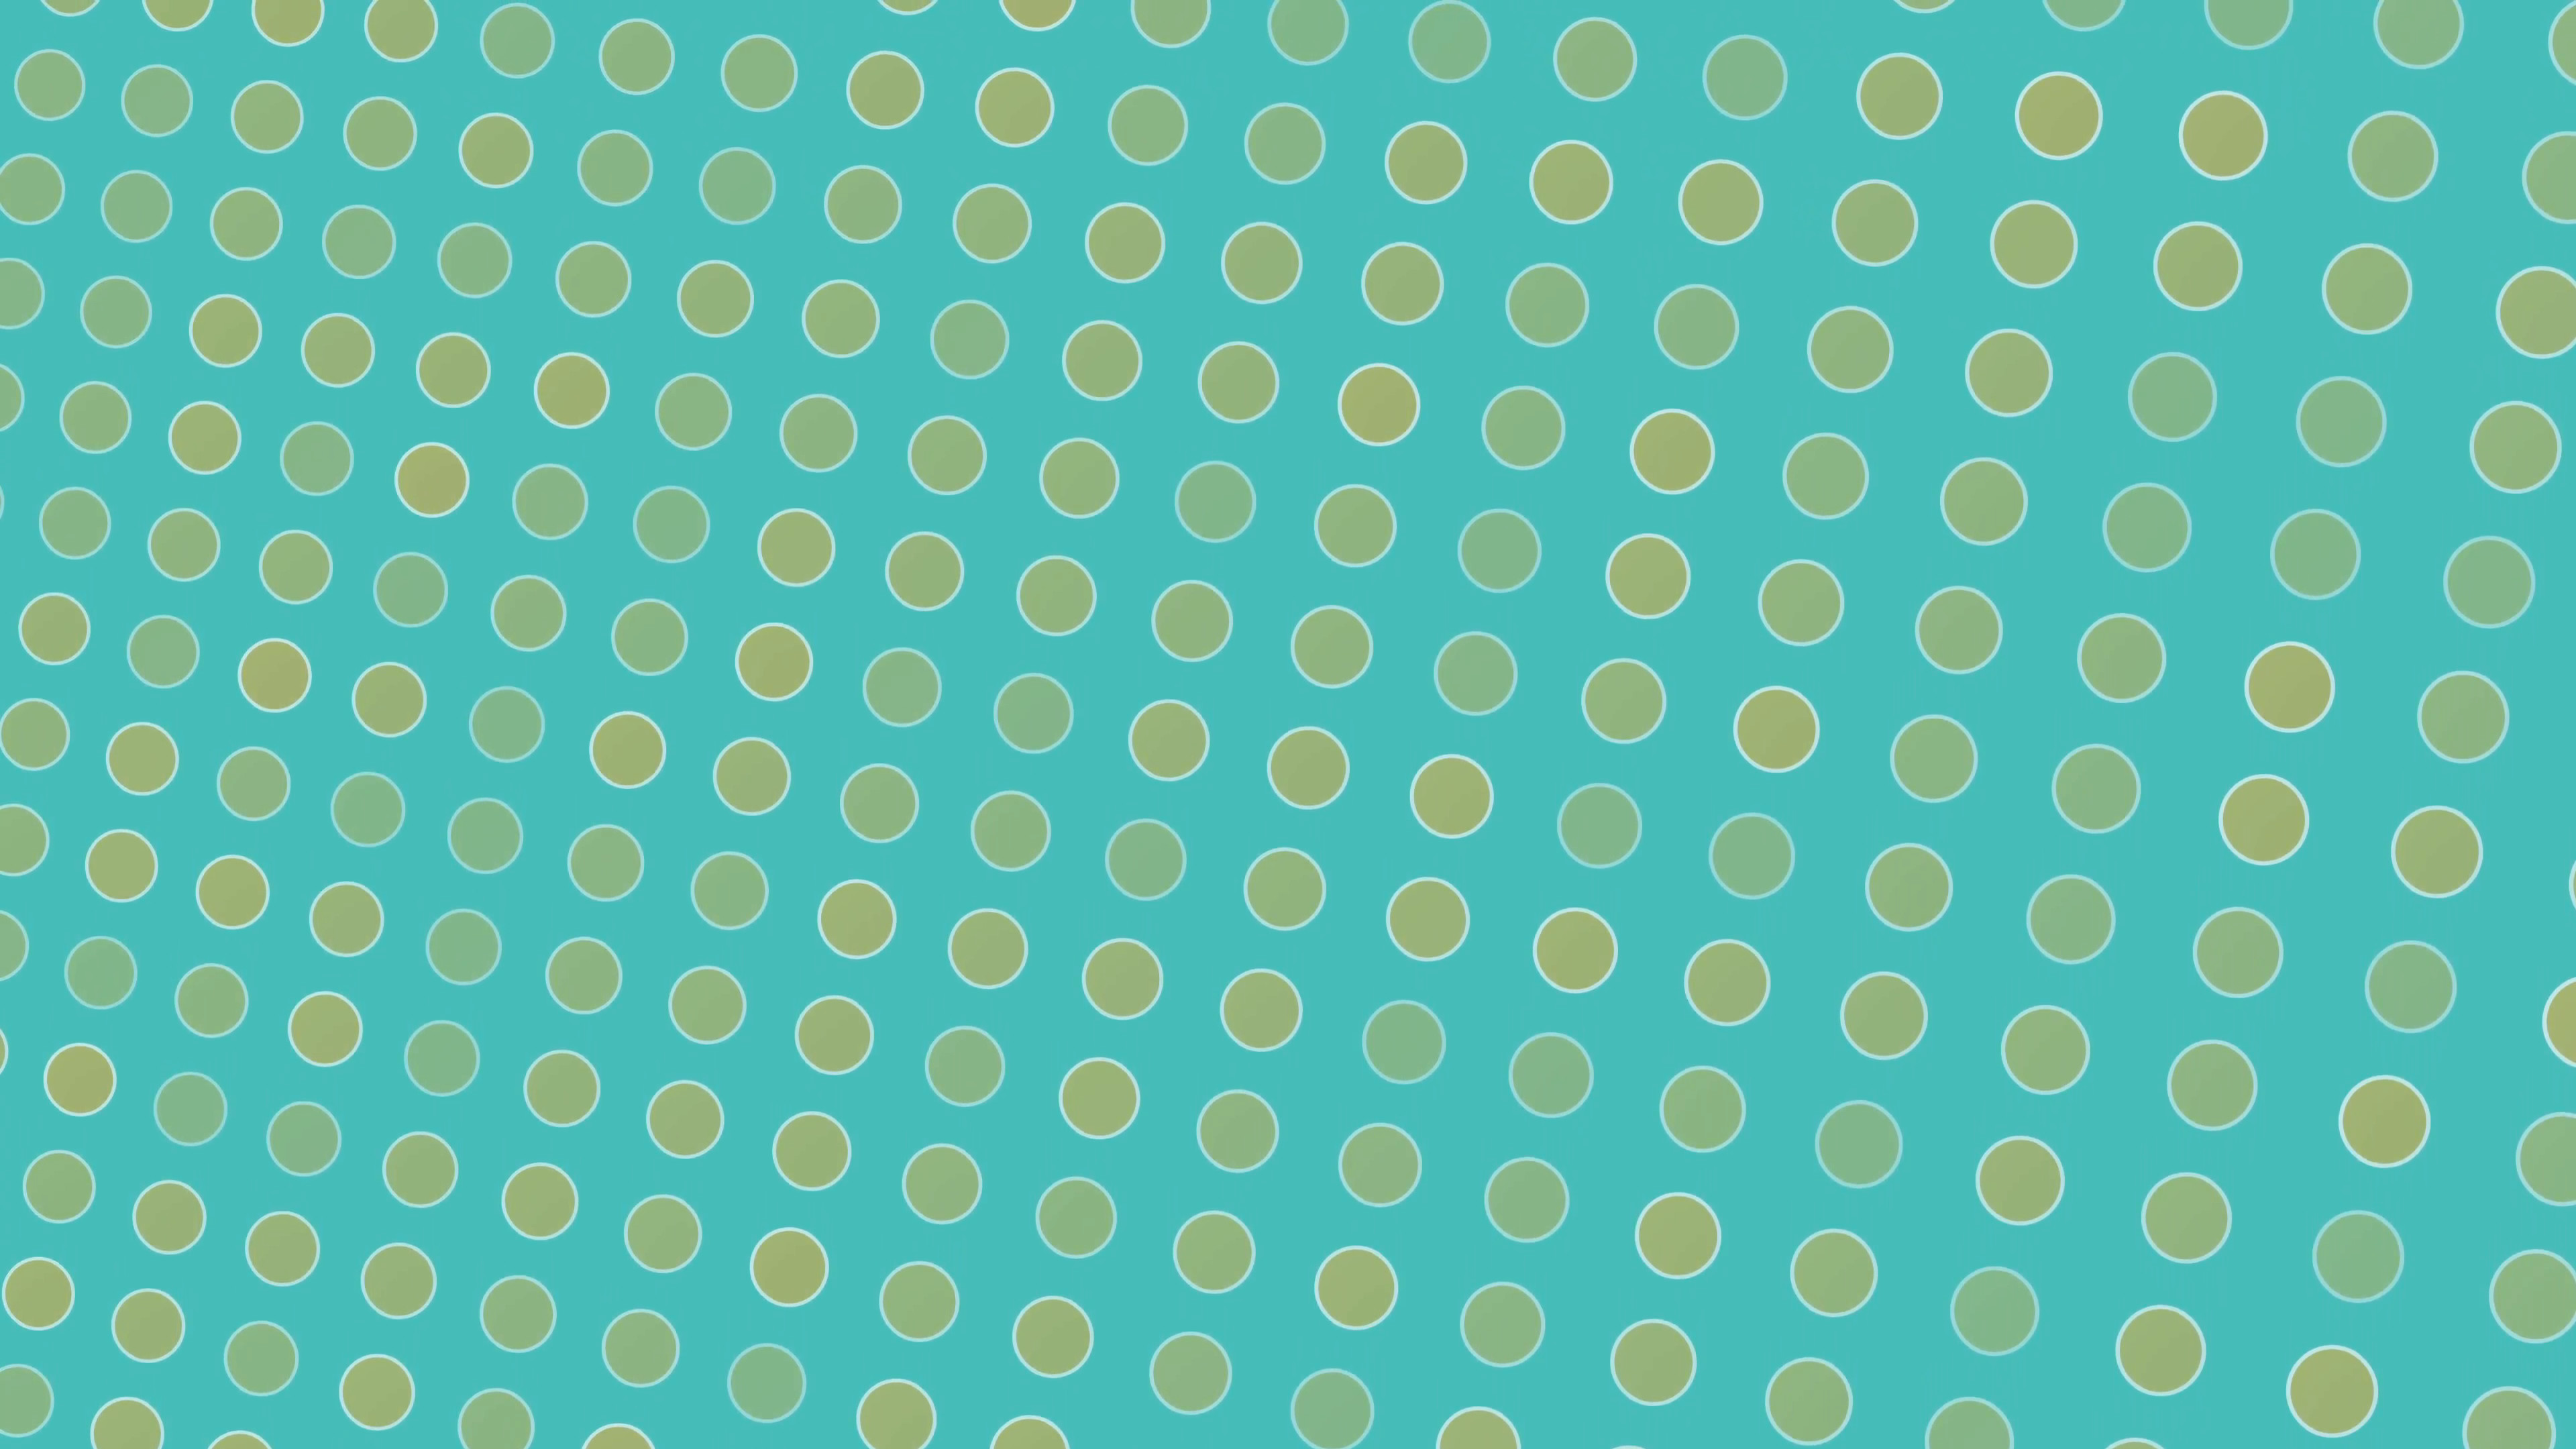 3840x2160 MGUHD001 circles colored with white frames Cyan background Motion Background  - VideoBlocks